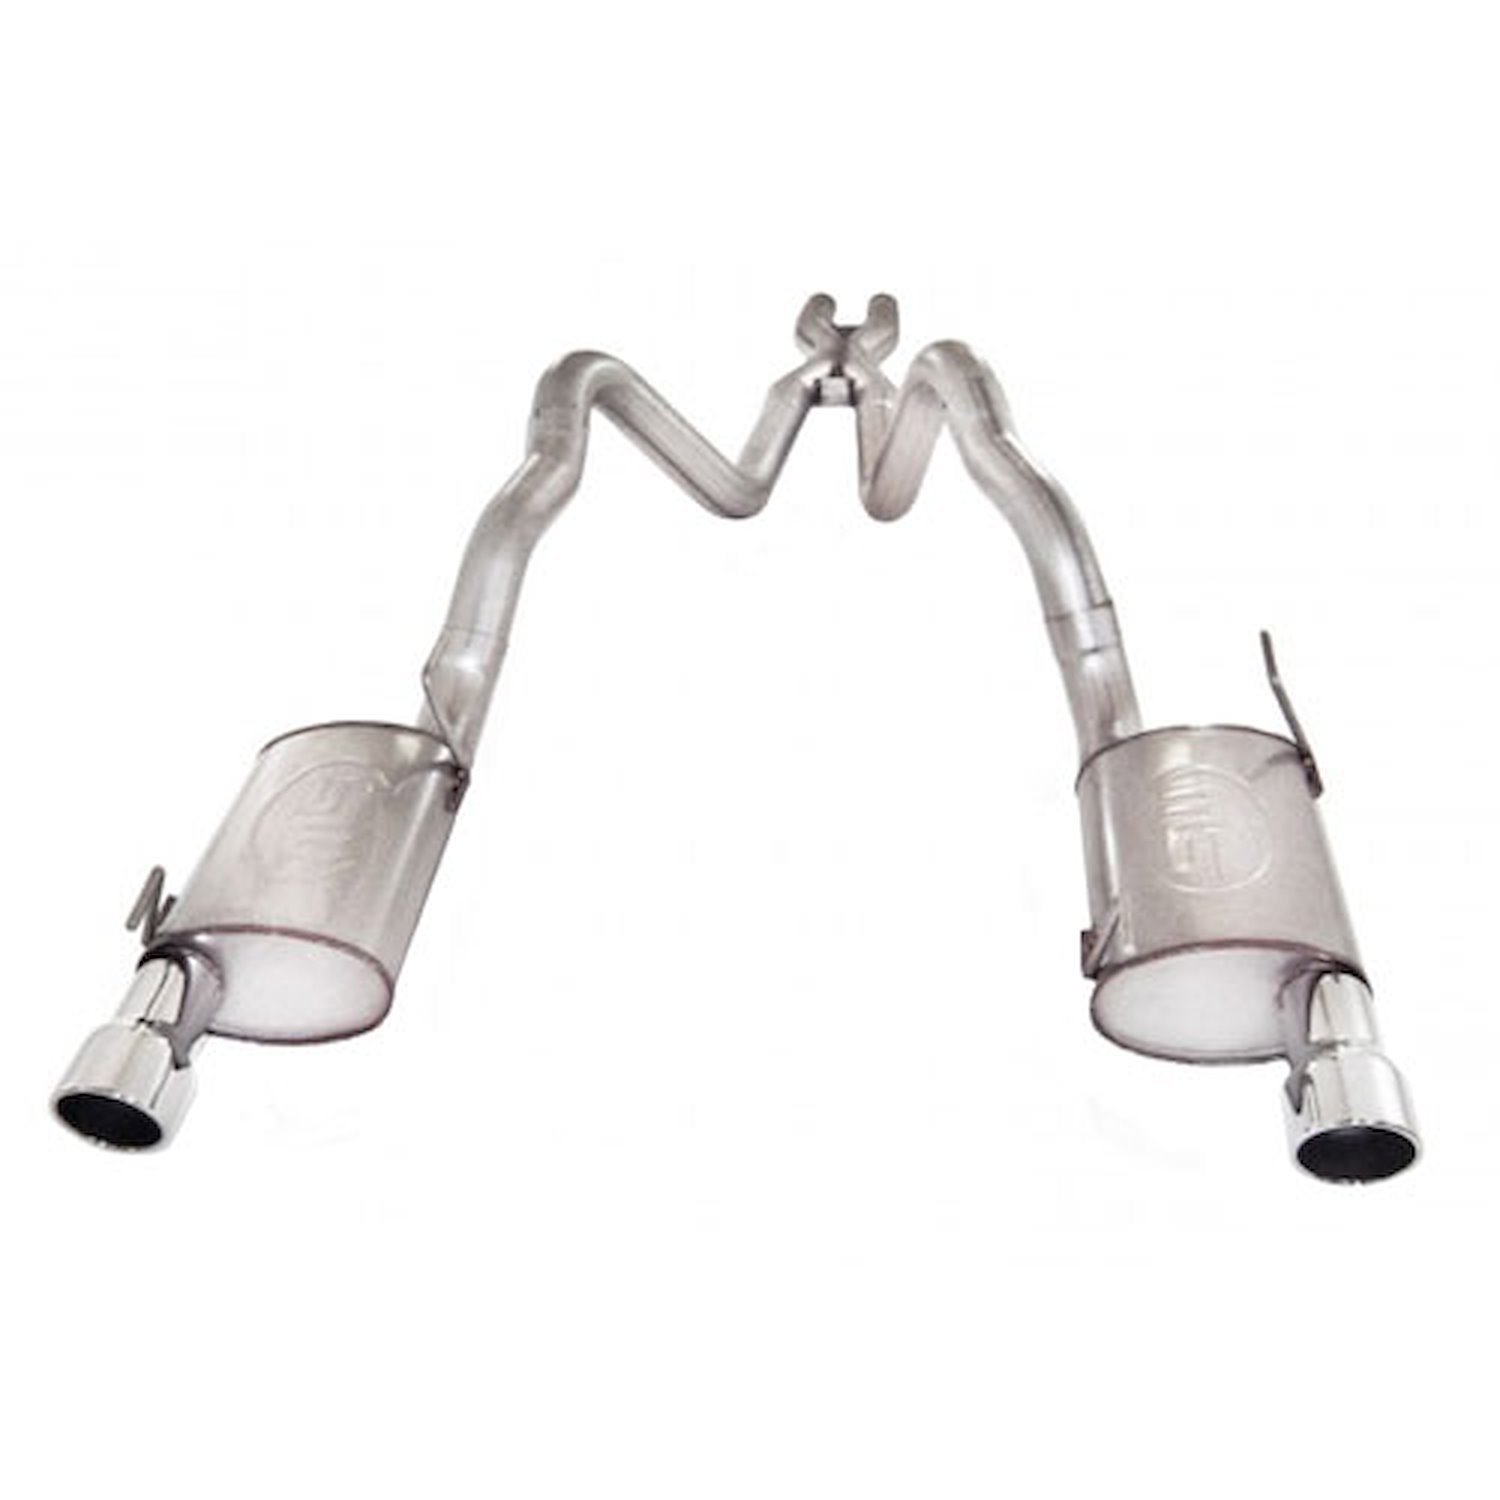 2005-2009 Mustang GT 3 Cat back exhaust system.